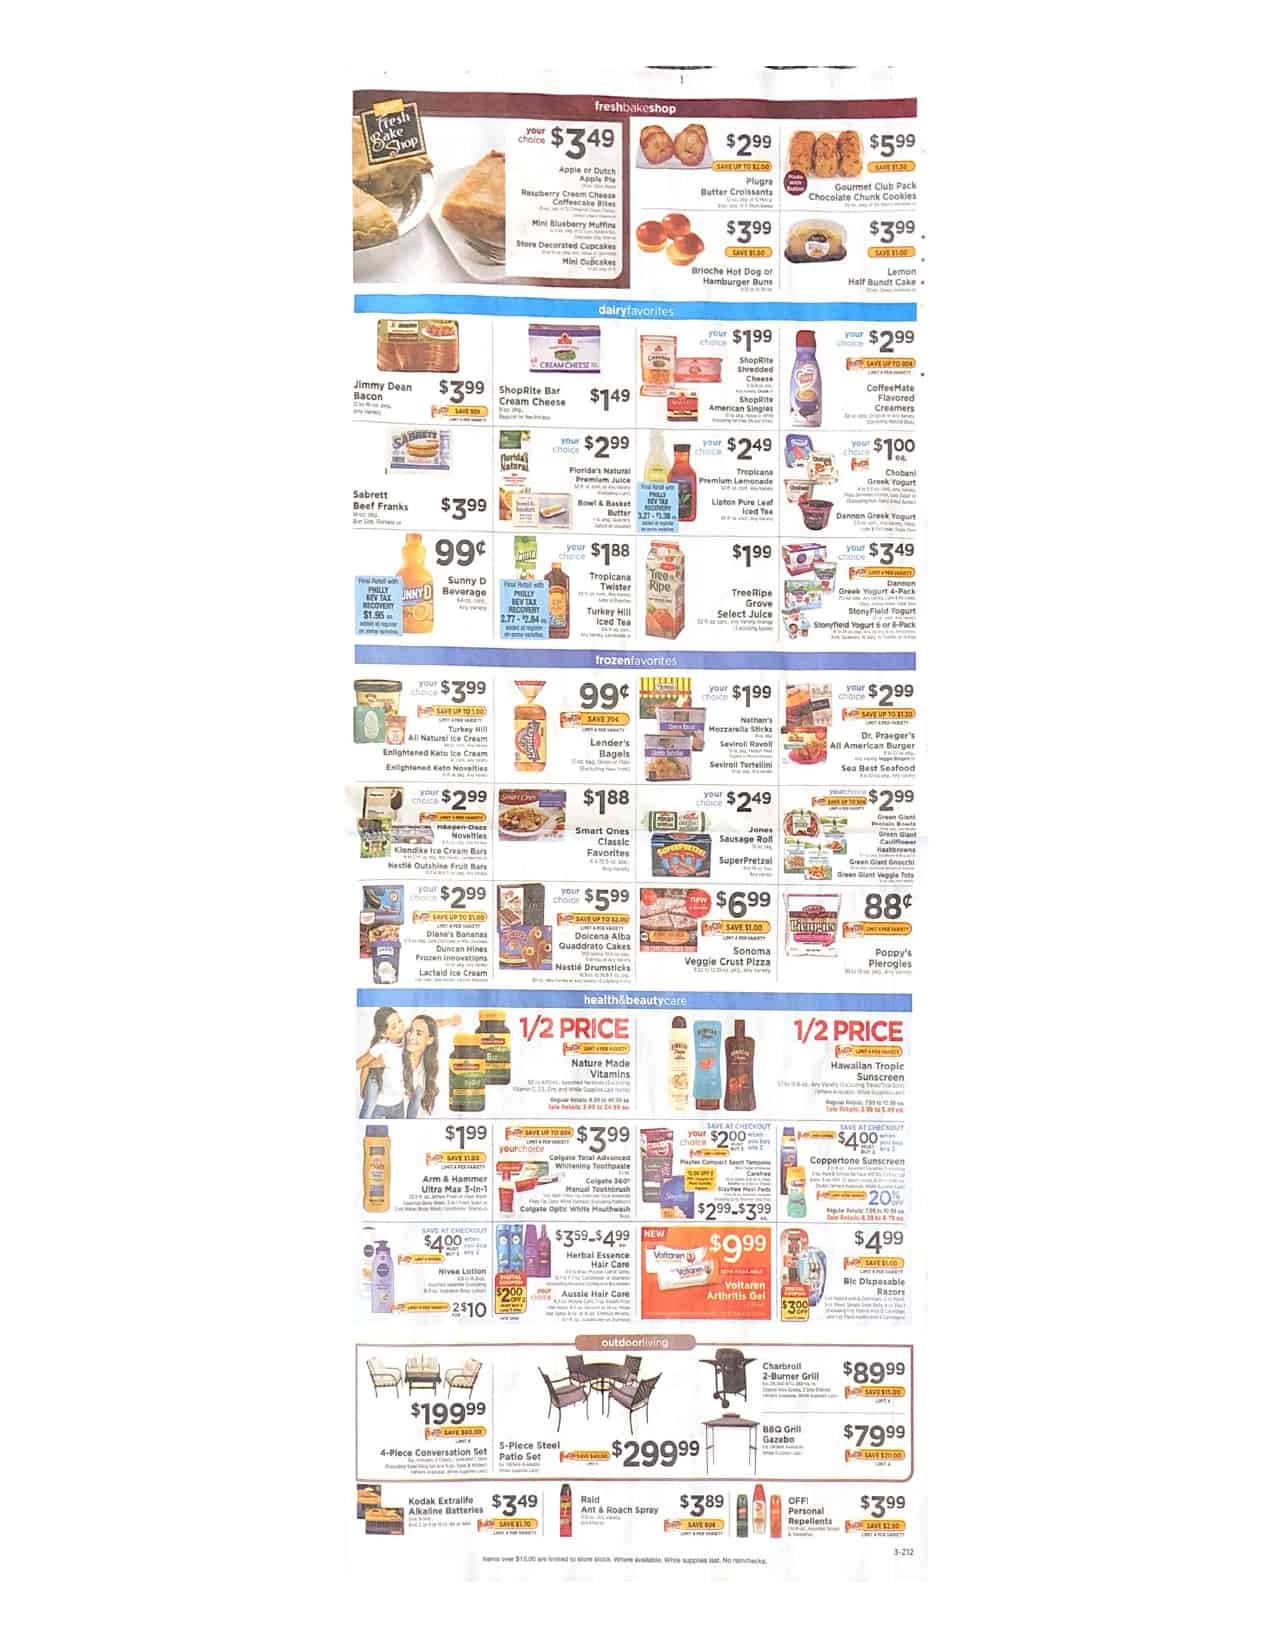 ShopRite Ad Scan For 05/24/20 Thru 05/30/20 Is Here!